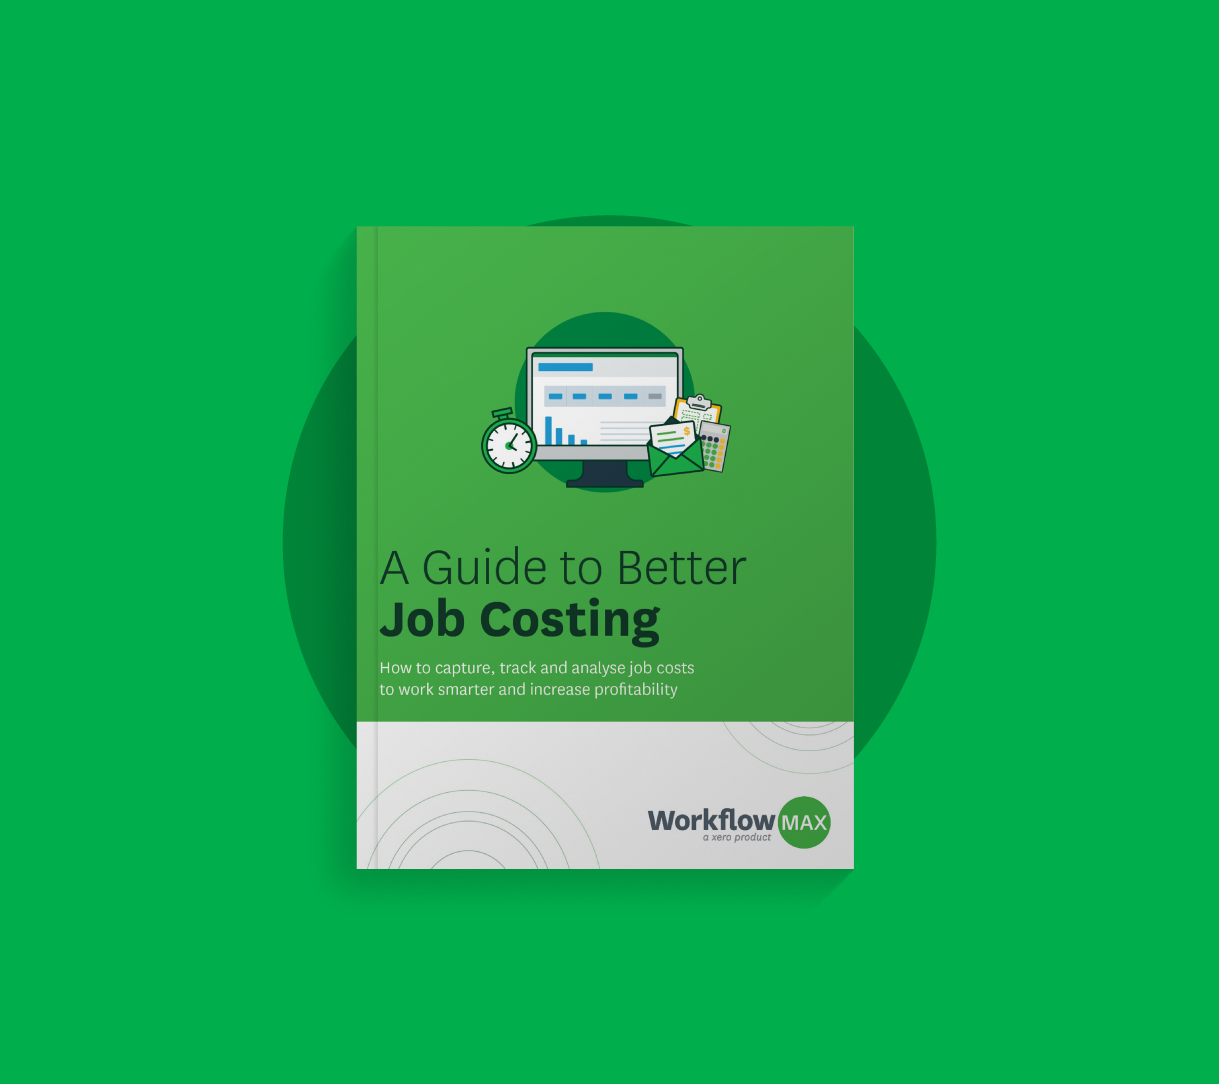 A guide to better job costing